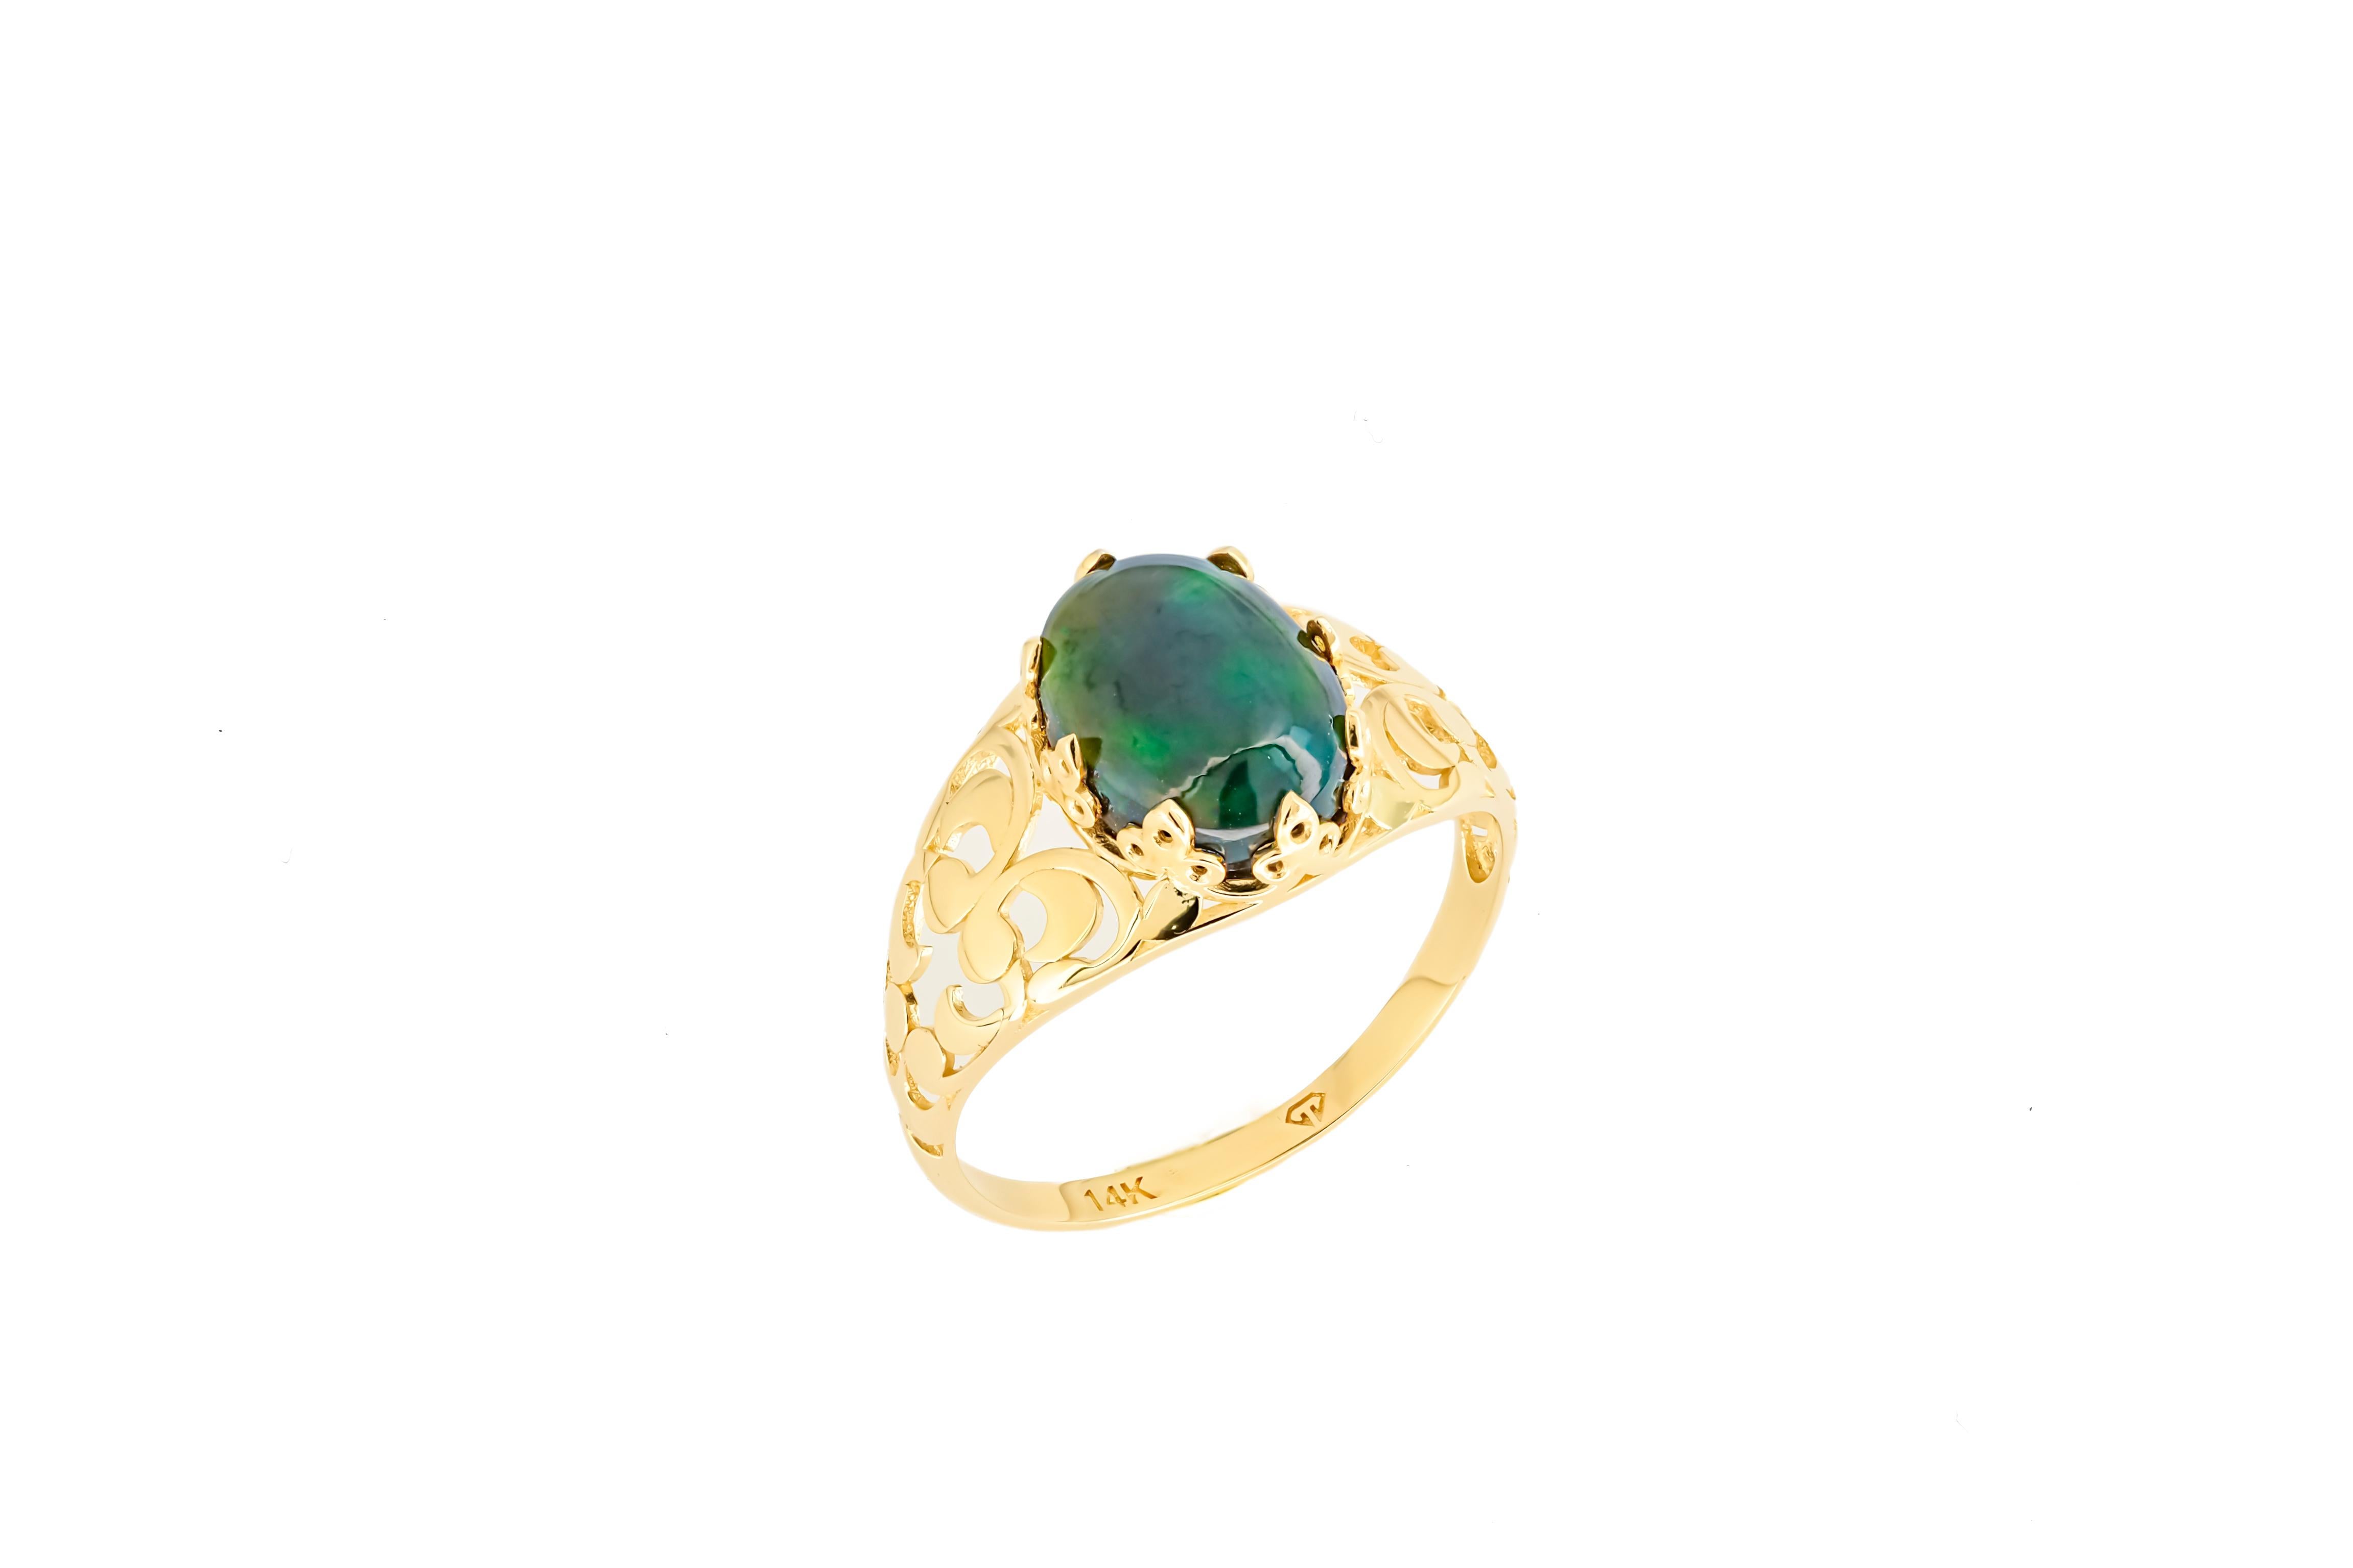 For Sale:  Black Opal Vitage Style Ring in 14 Karat Gold, Ethiopian Opal Cabochon Ring 9